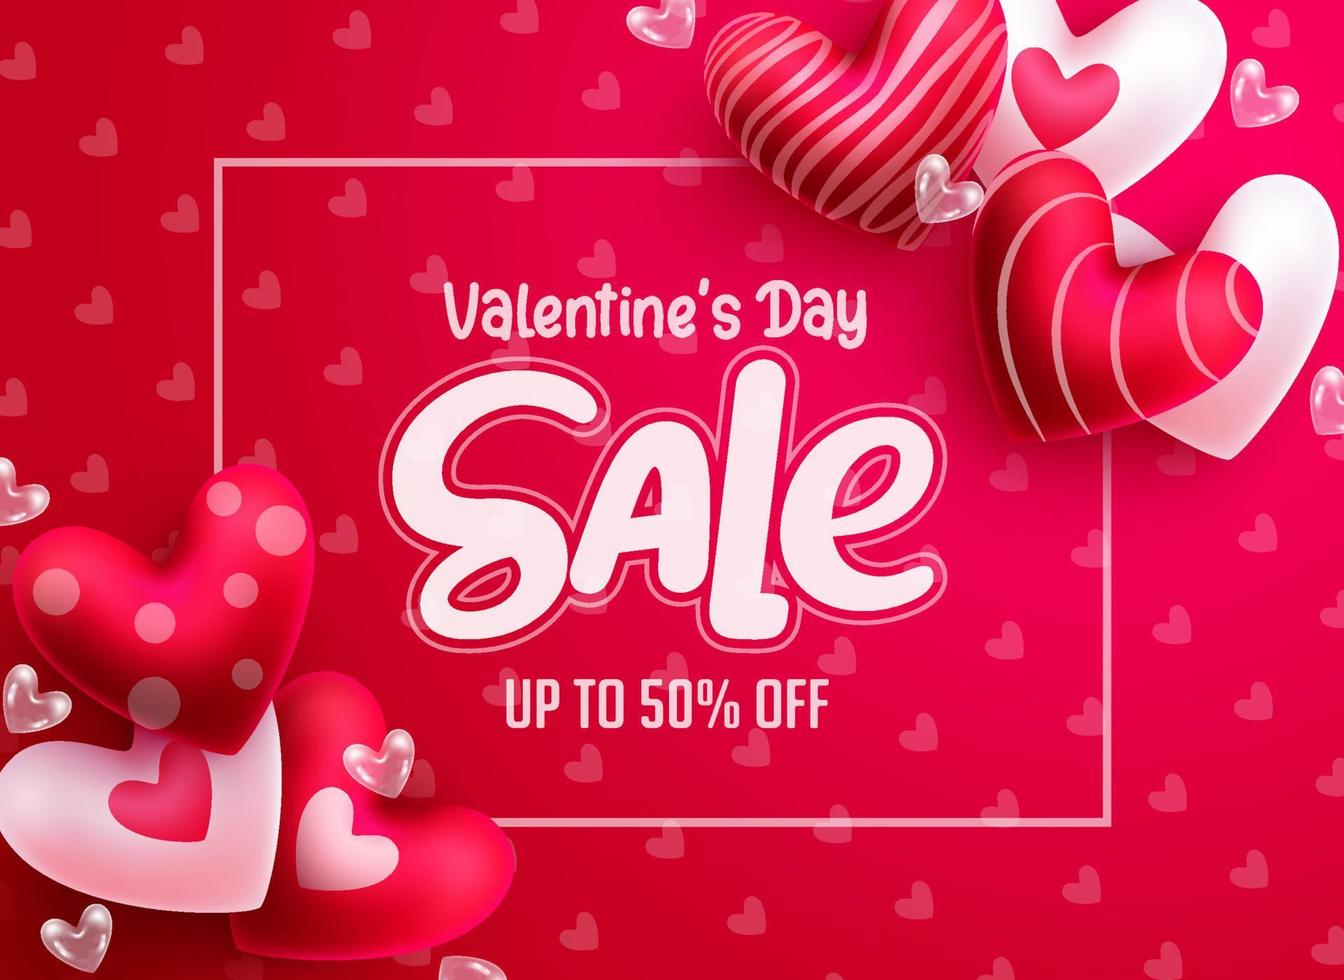 Valentine's sale vector banner design. Valentine's discount card for hearts day celebration shopping clearance promo.